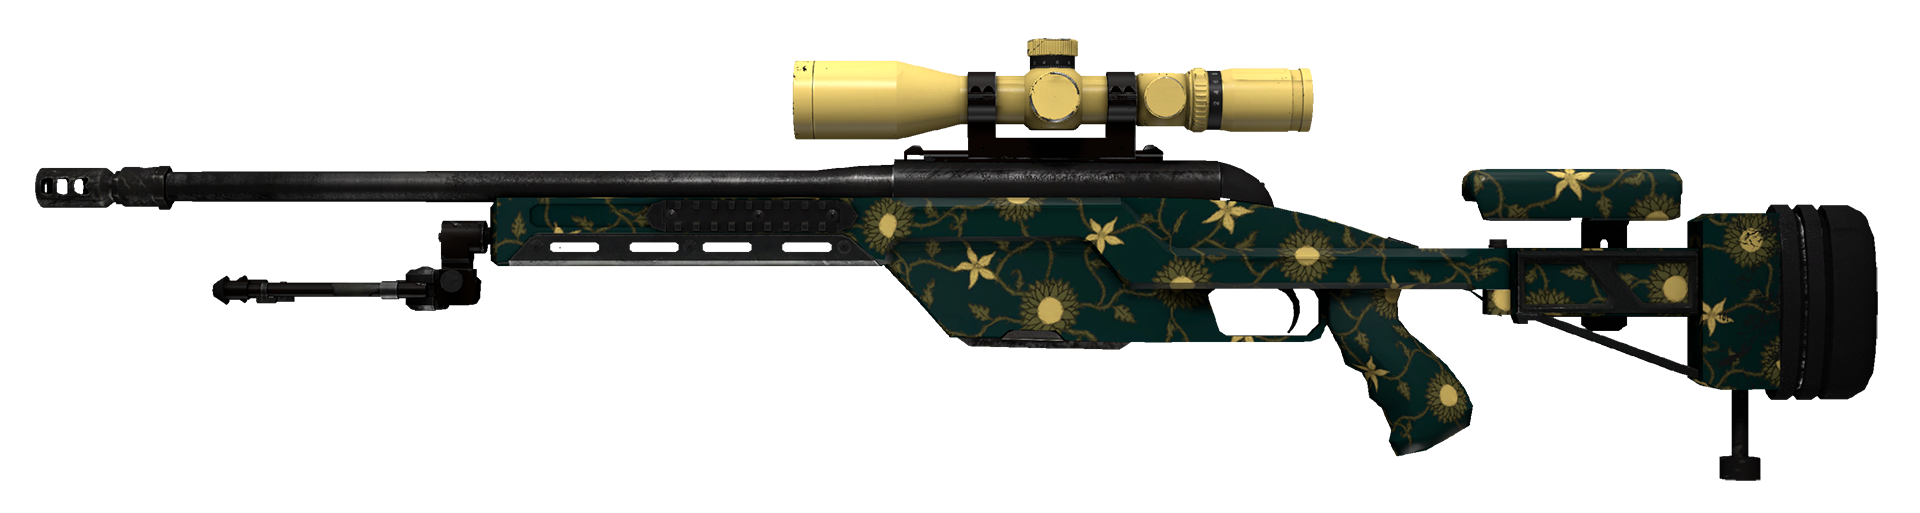 SSG 08 Sea Calico Large Rendering